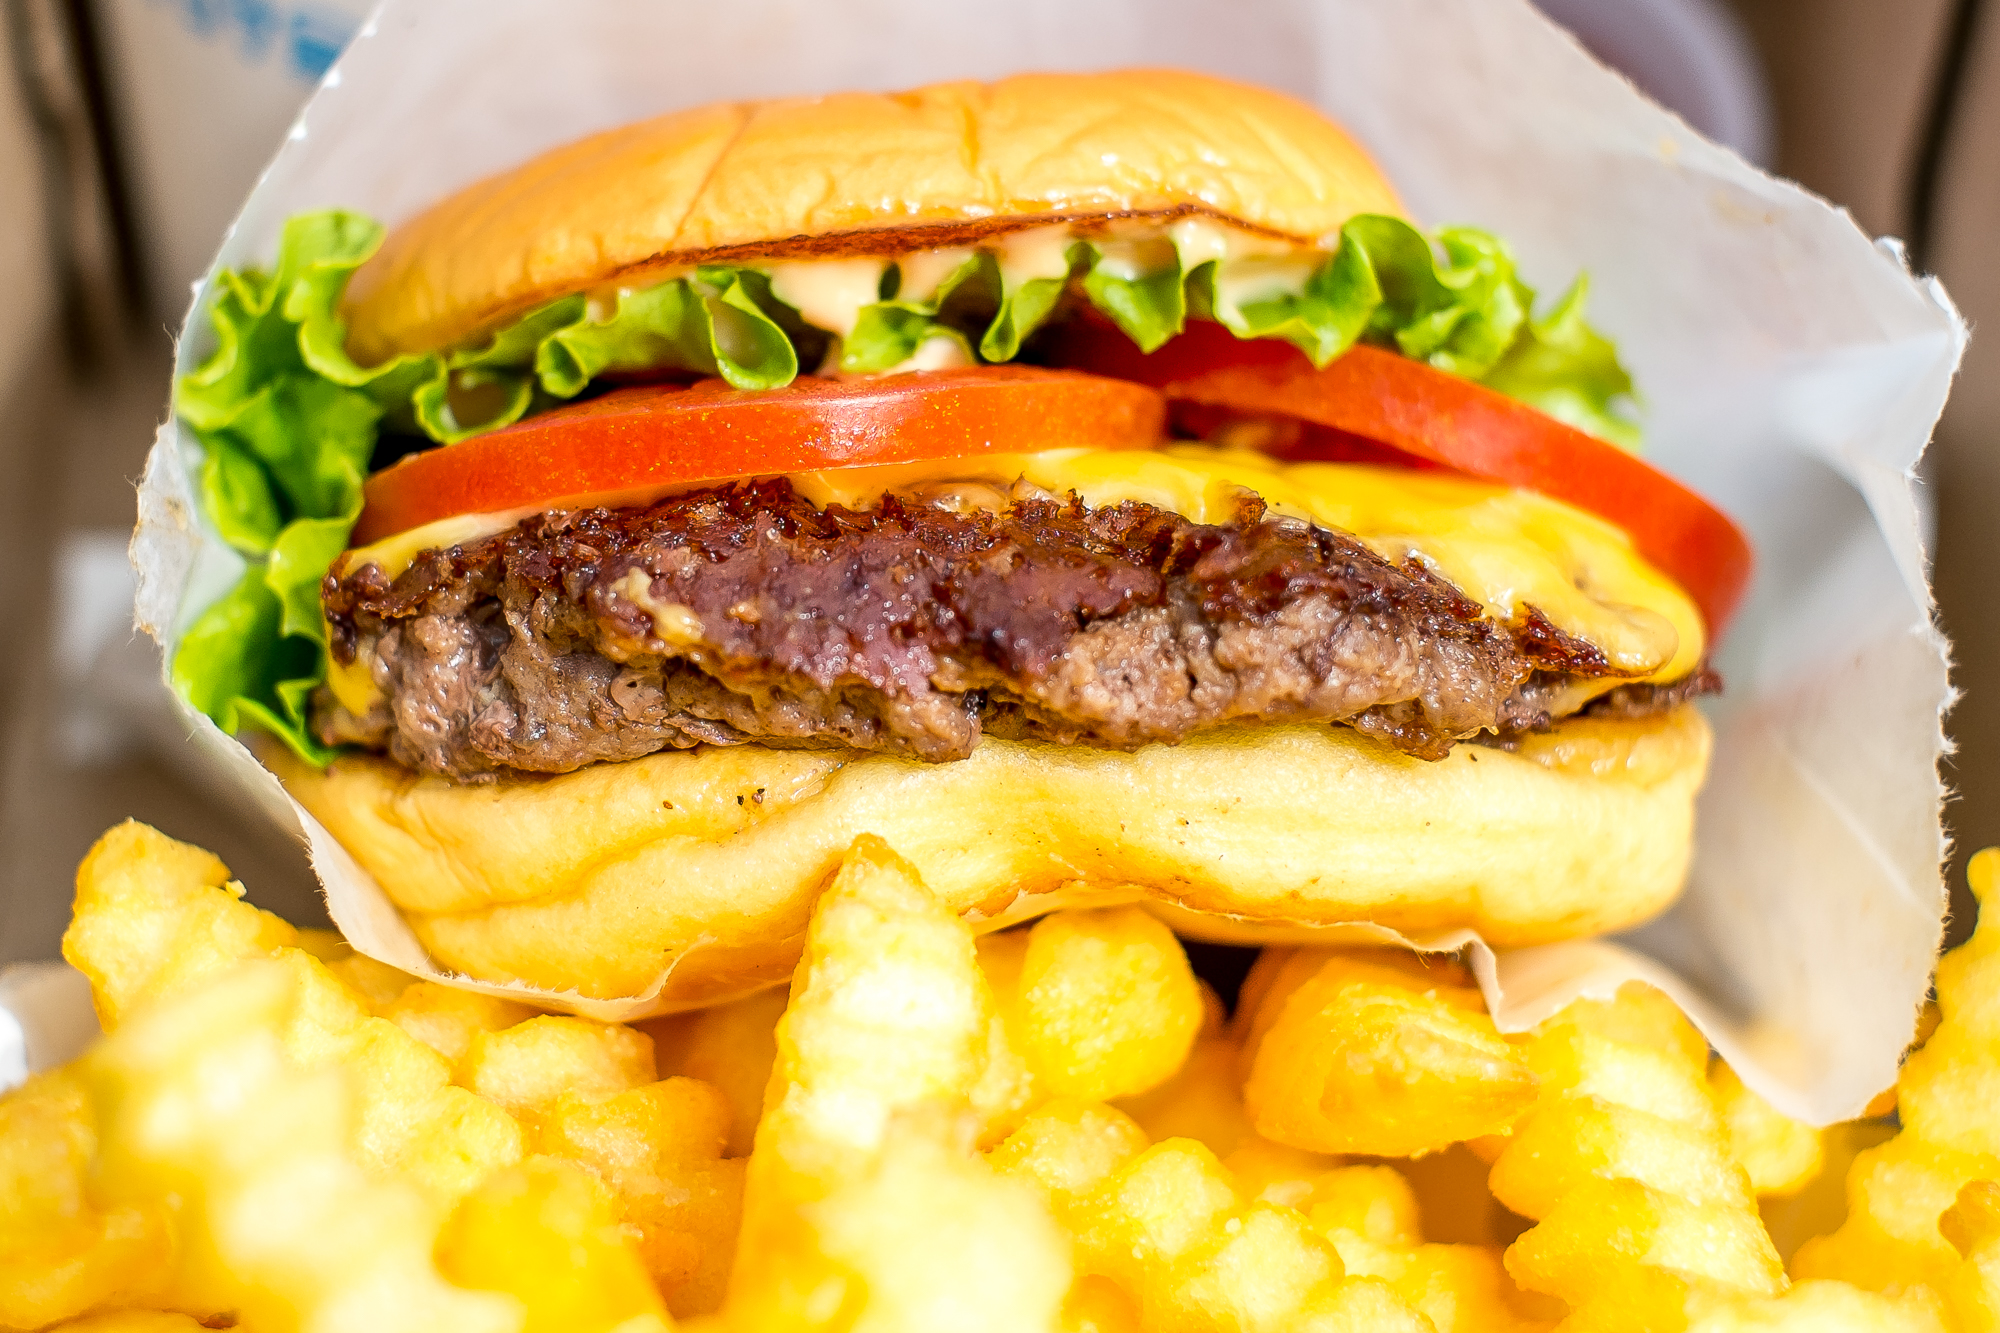 A Shake Shack burger in paper wrapping rests on top of crinkly fries.